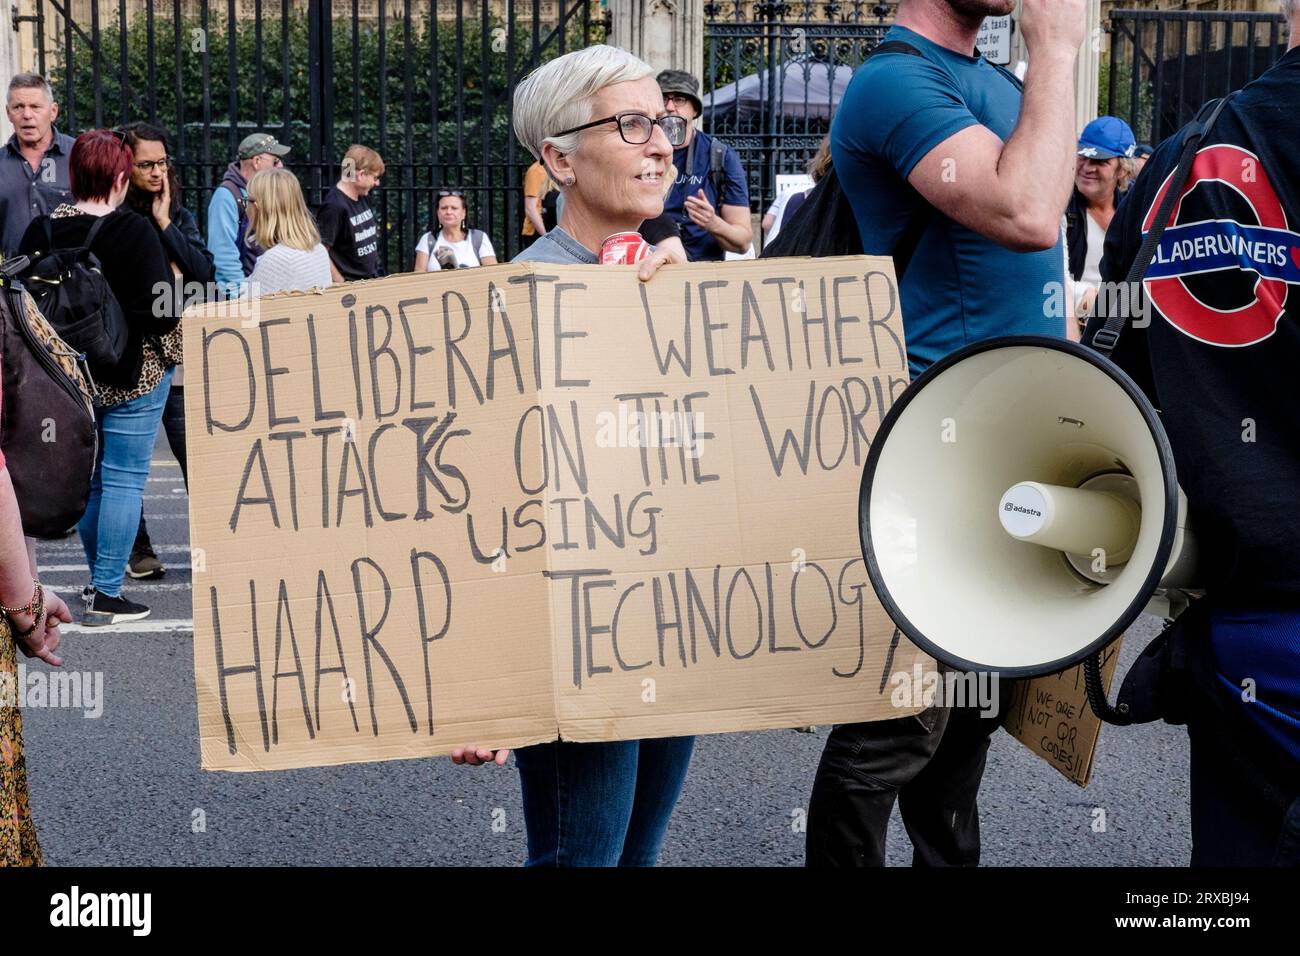 A woman holds a placard claiming HAARP technology is being used to manipulate weather attacks on the world. London UK. Stock Photo